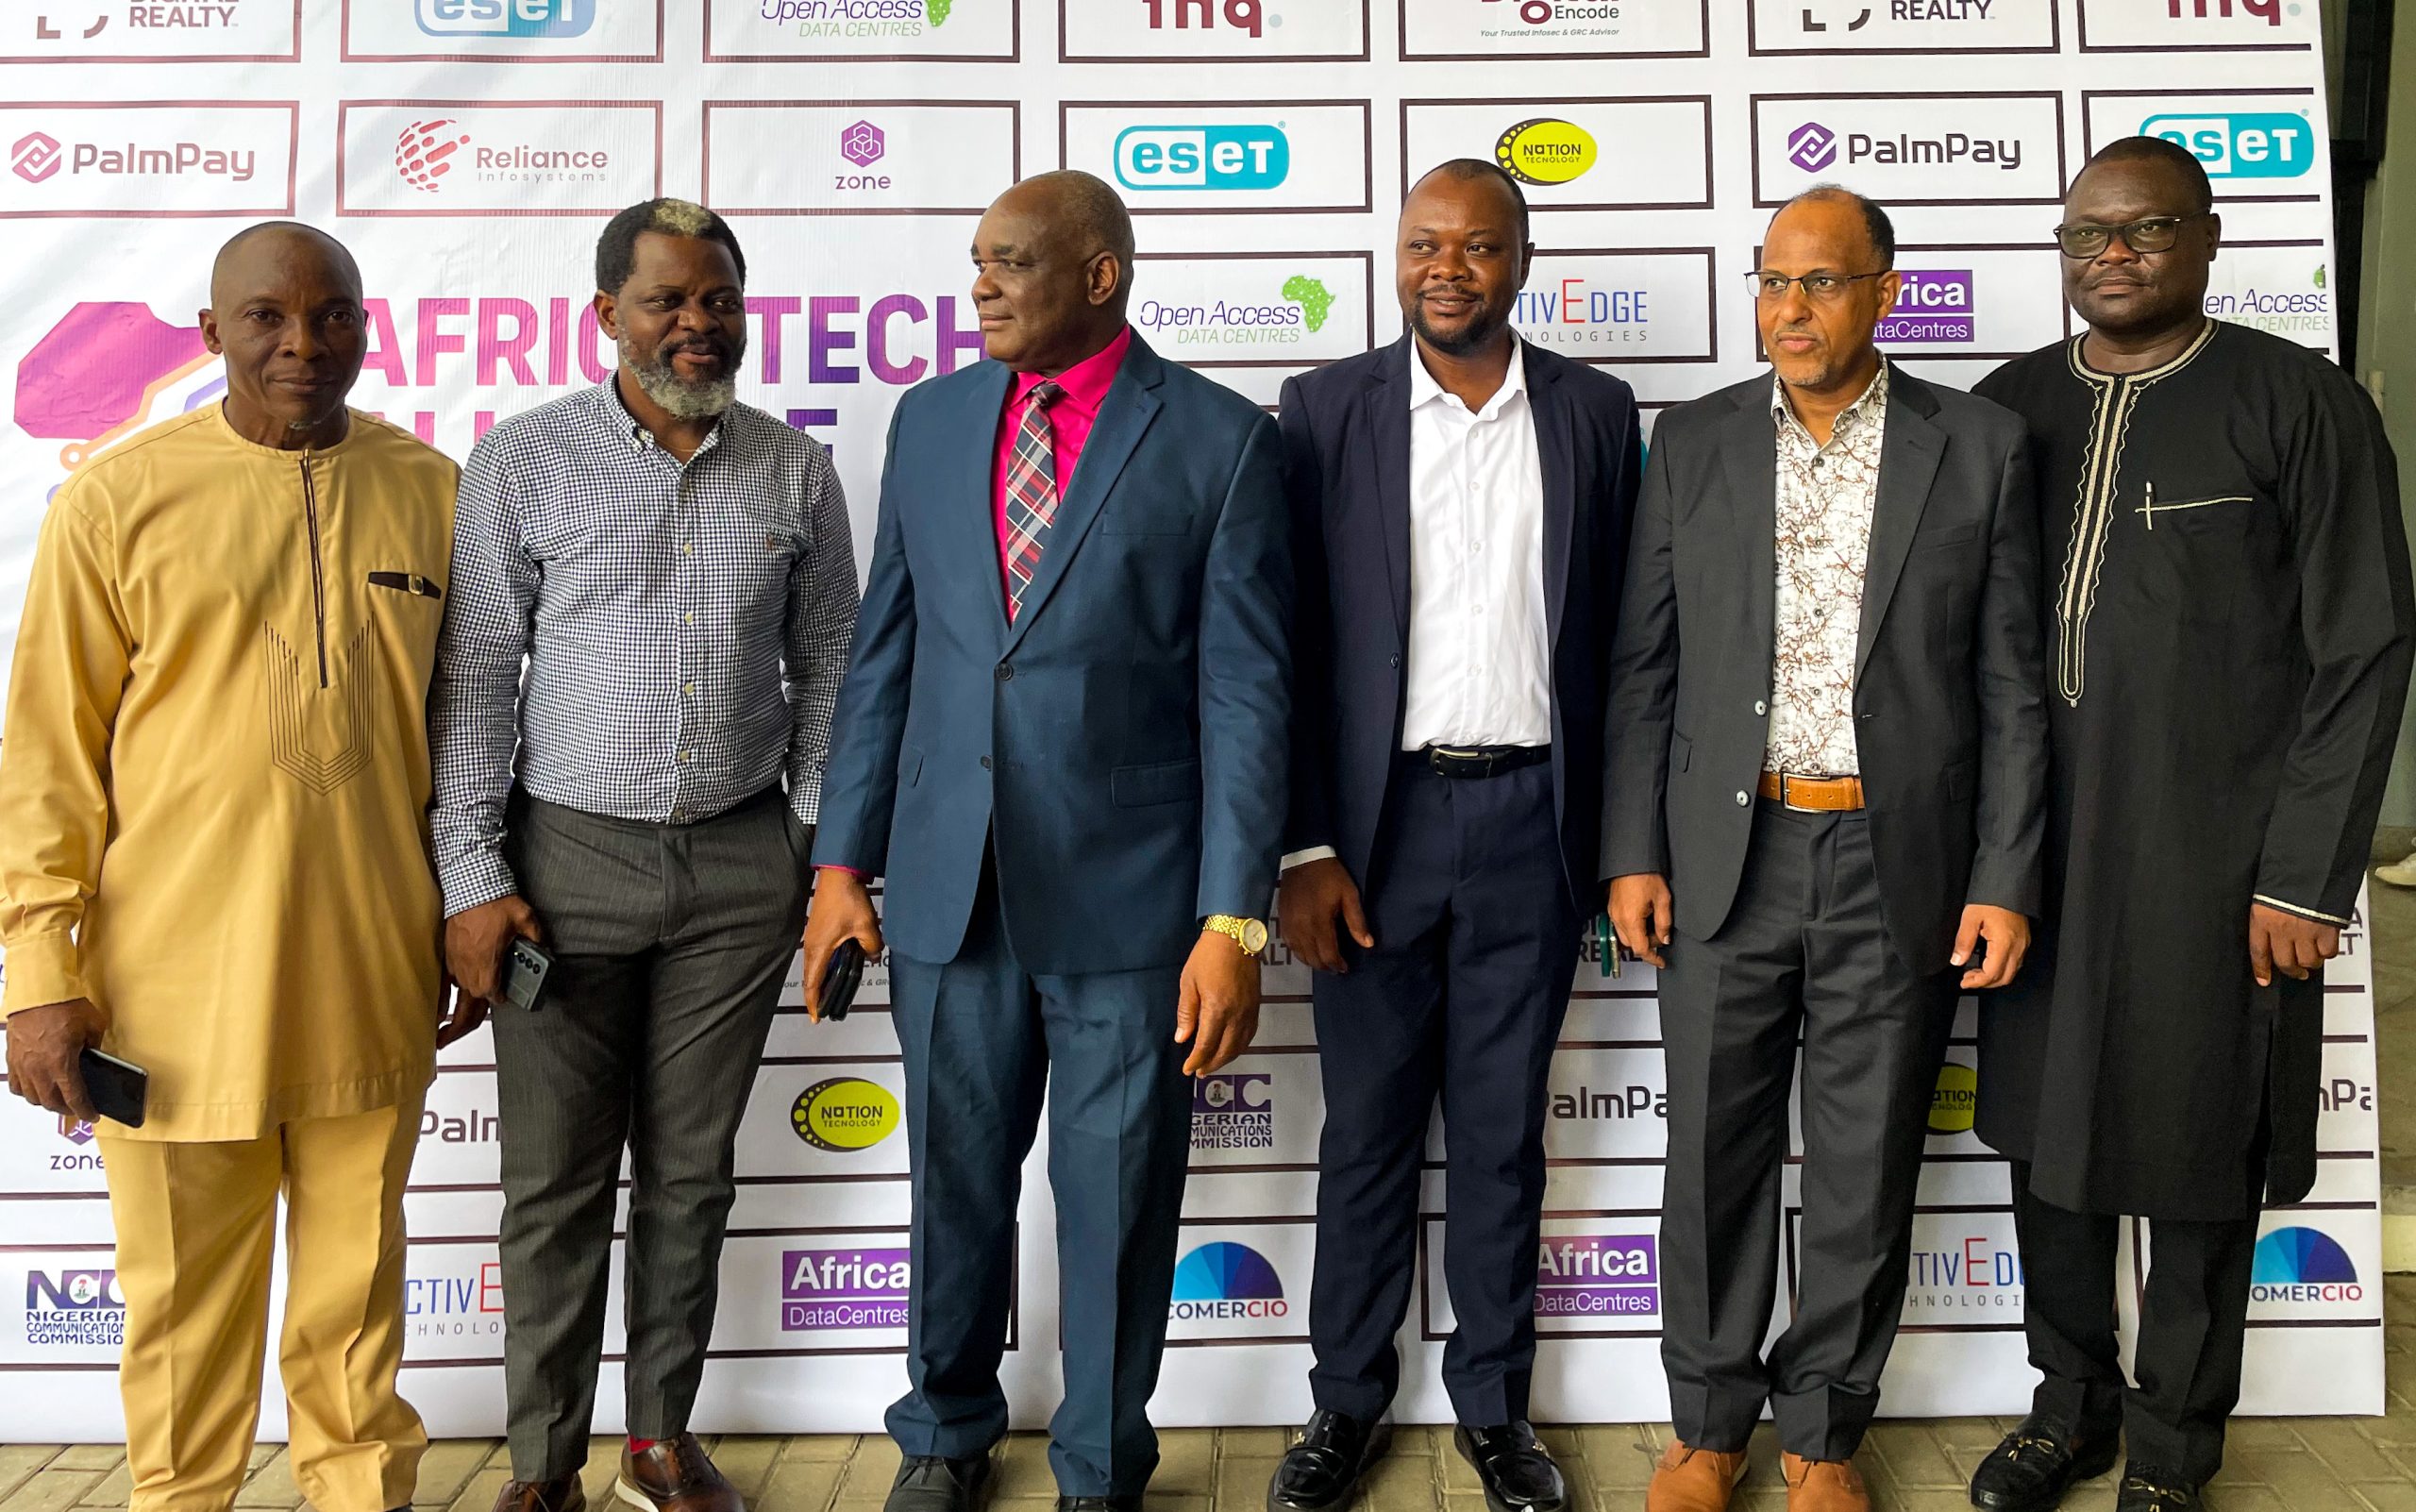 L-R: Chike Onwuegbuchi, Chairman, NITRA and Co-Convener, Africa Tech Alliance Forum (AfriTECH); Temitayo Oduwole, Head of IT and Payments at PalmPay; Reuben Muoka, Director of Public Affairs at Nigerian Communications Commission (NCC); Peter Oluka, Editor, Techeconomy and Co-Convener, AfriTECH; Muhammad Rudman, CEO, Internet Exchange Point of Nigeria (IXPN), and Gbolahan Awonuga, Head of Operations, Association of Licensed Telecoms Operators of Nigeria (ALTON), at AfriTECH 3.0 and ATAEx Awards 2023 held at The Providence Hotel, Ikeja Lagos, November 08, 2023.